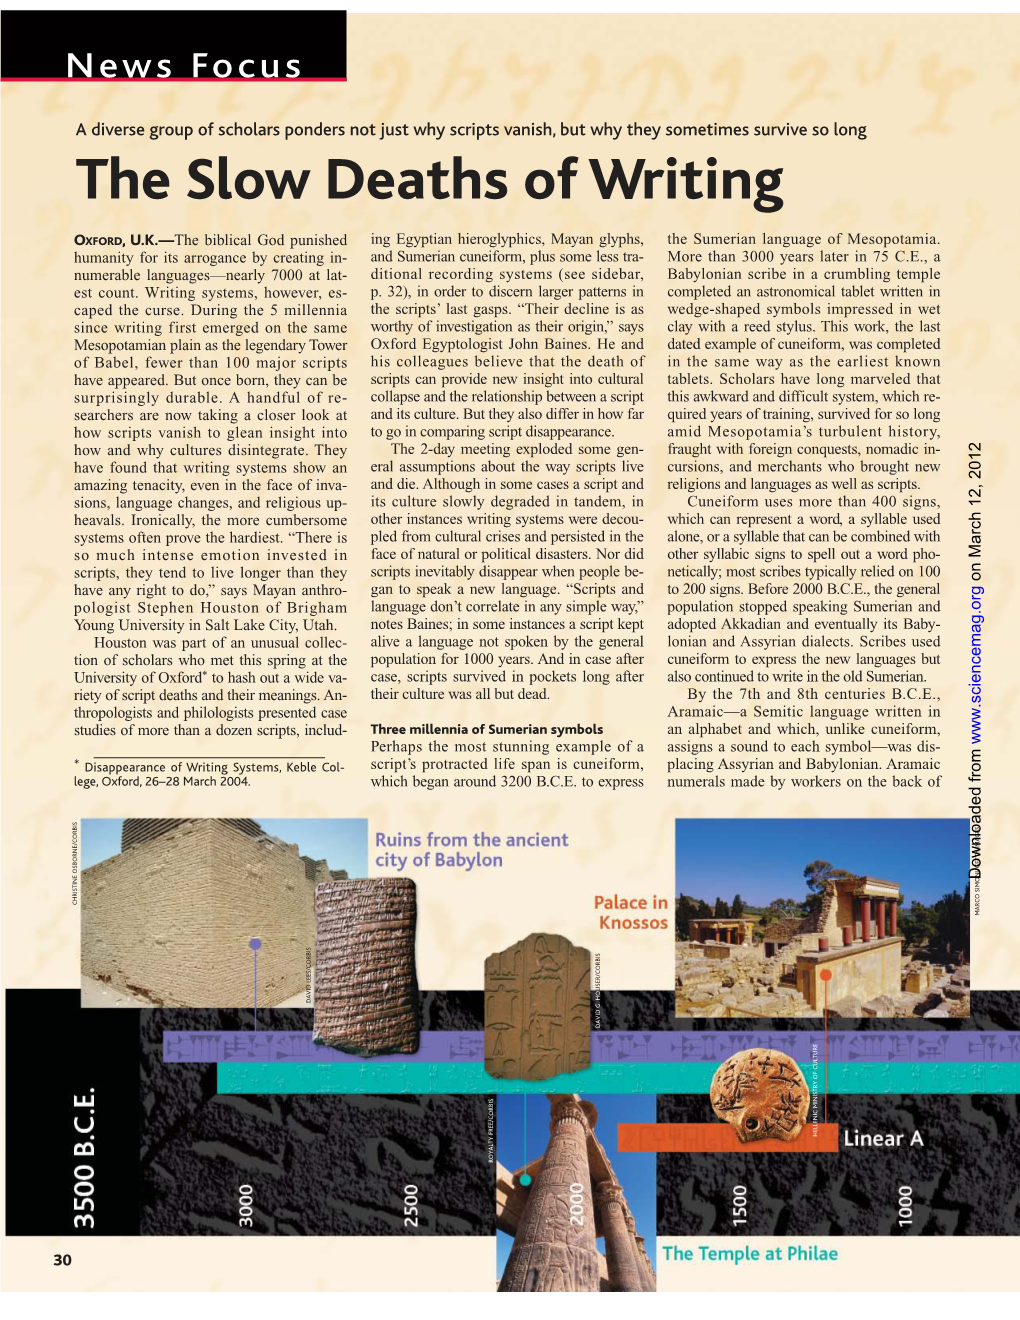 The Slow Deaths of Writing